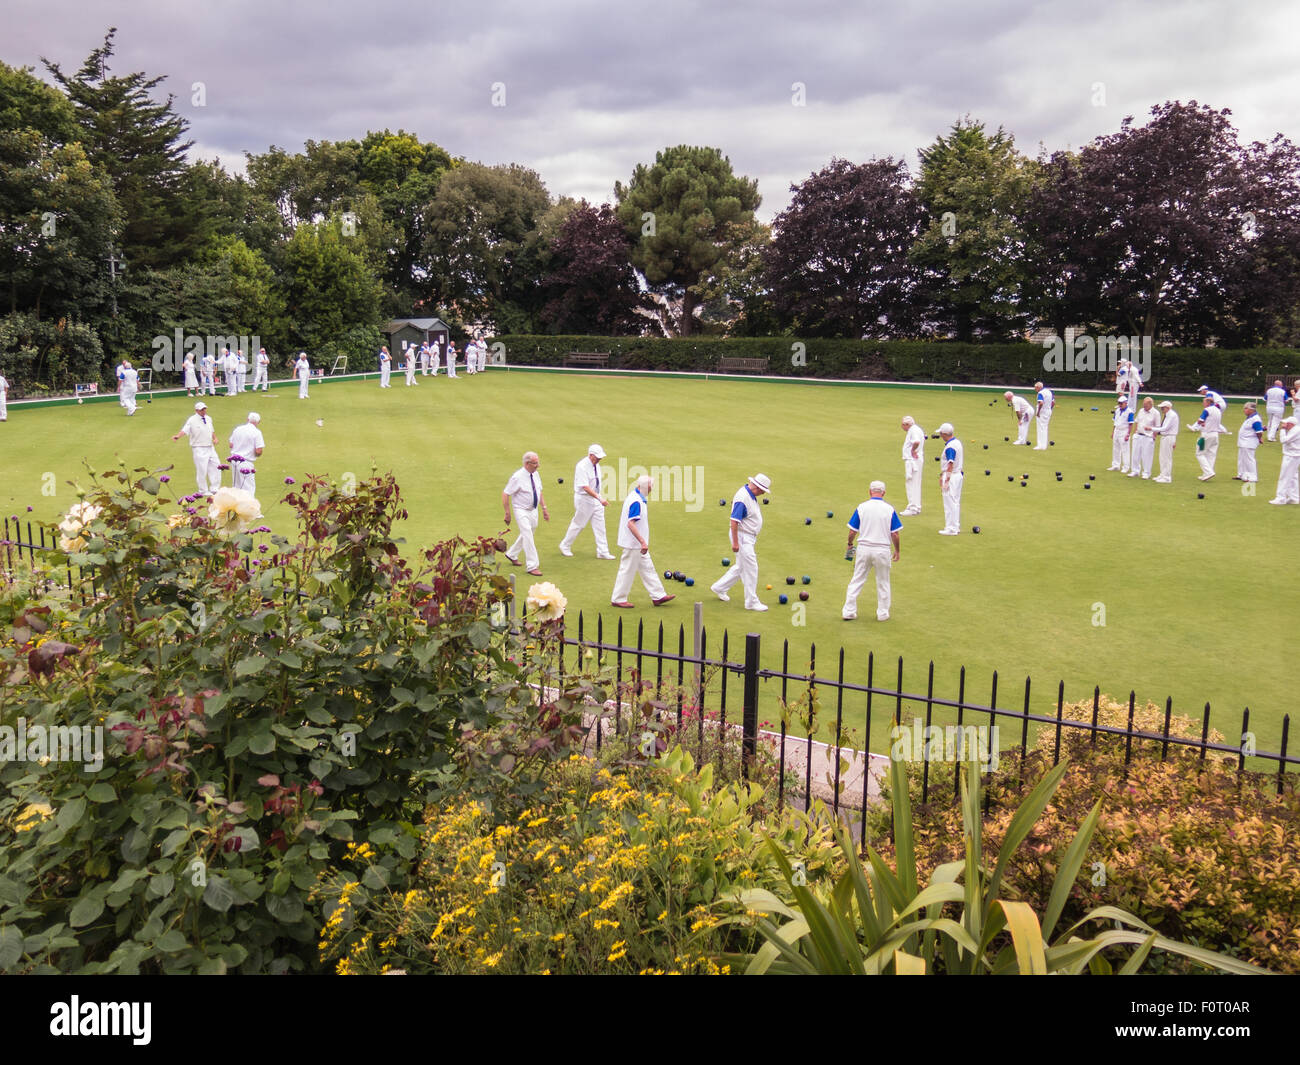 Whitstable, UK, 20th August 2015. Whitstable bowling club hosts a competition with Gravesend Men's Veterans.  Viewed from the free entry public gardens of Whitstable Castle. Bowls have been played here for 75 years. Stock Photo